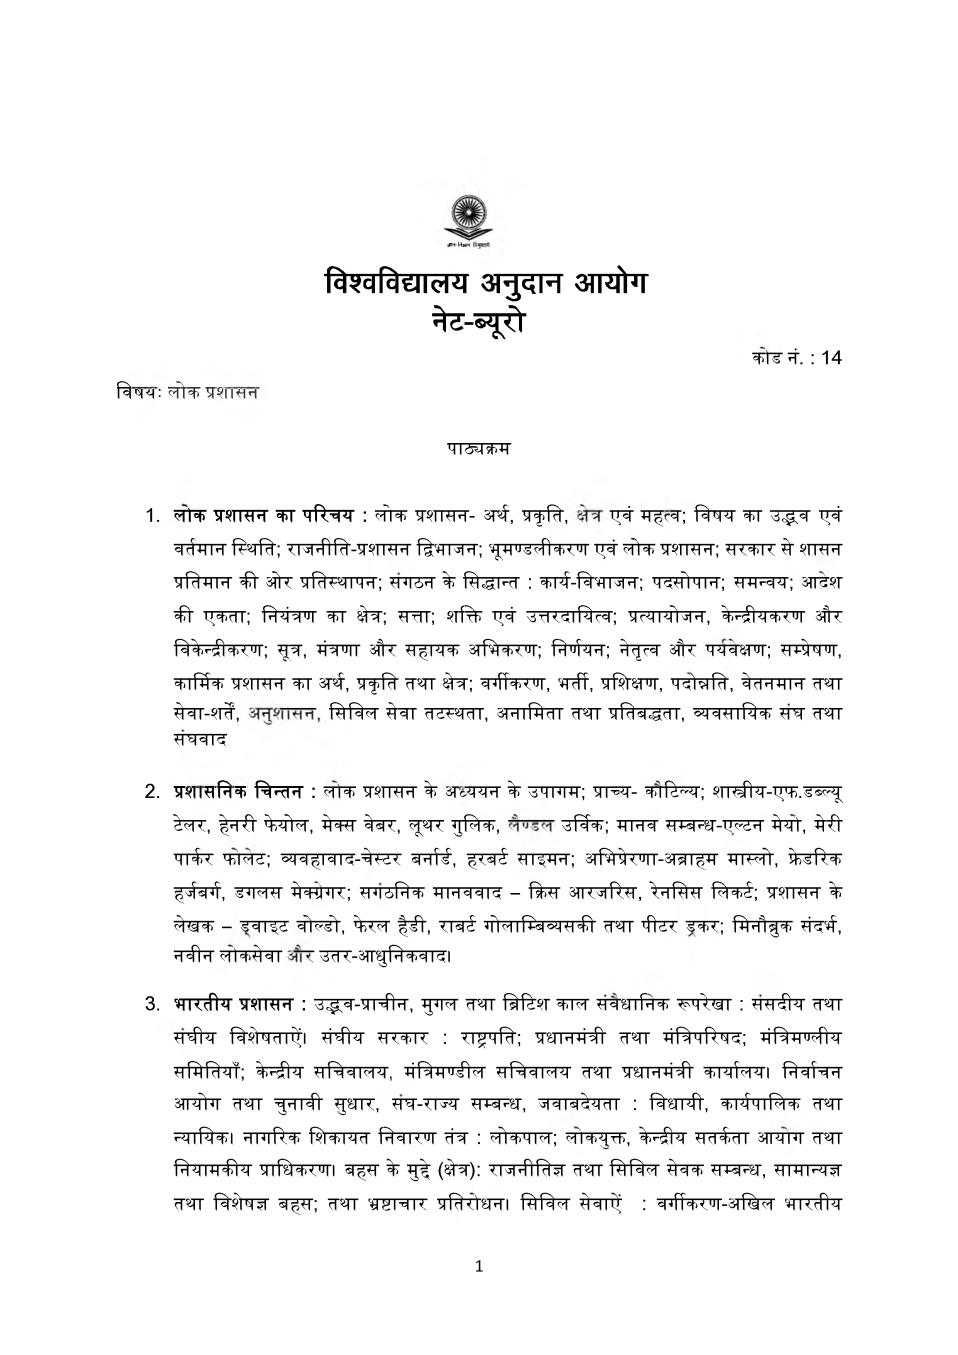 UGC NET Syllabus for Public Administration 2020 in Hindi - Page 1